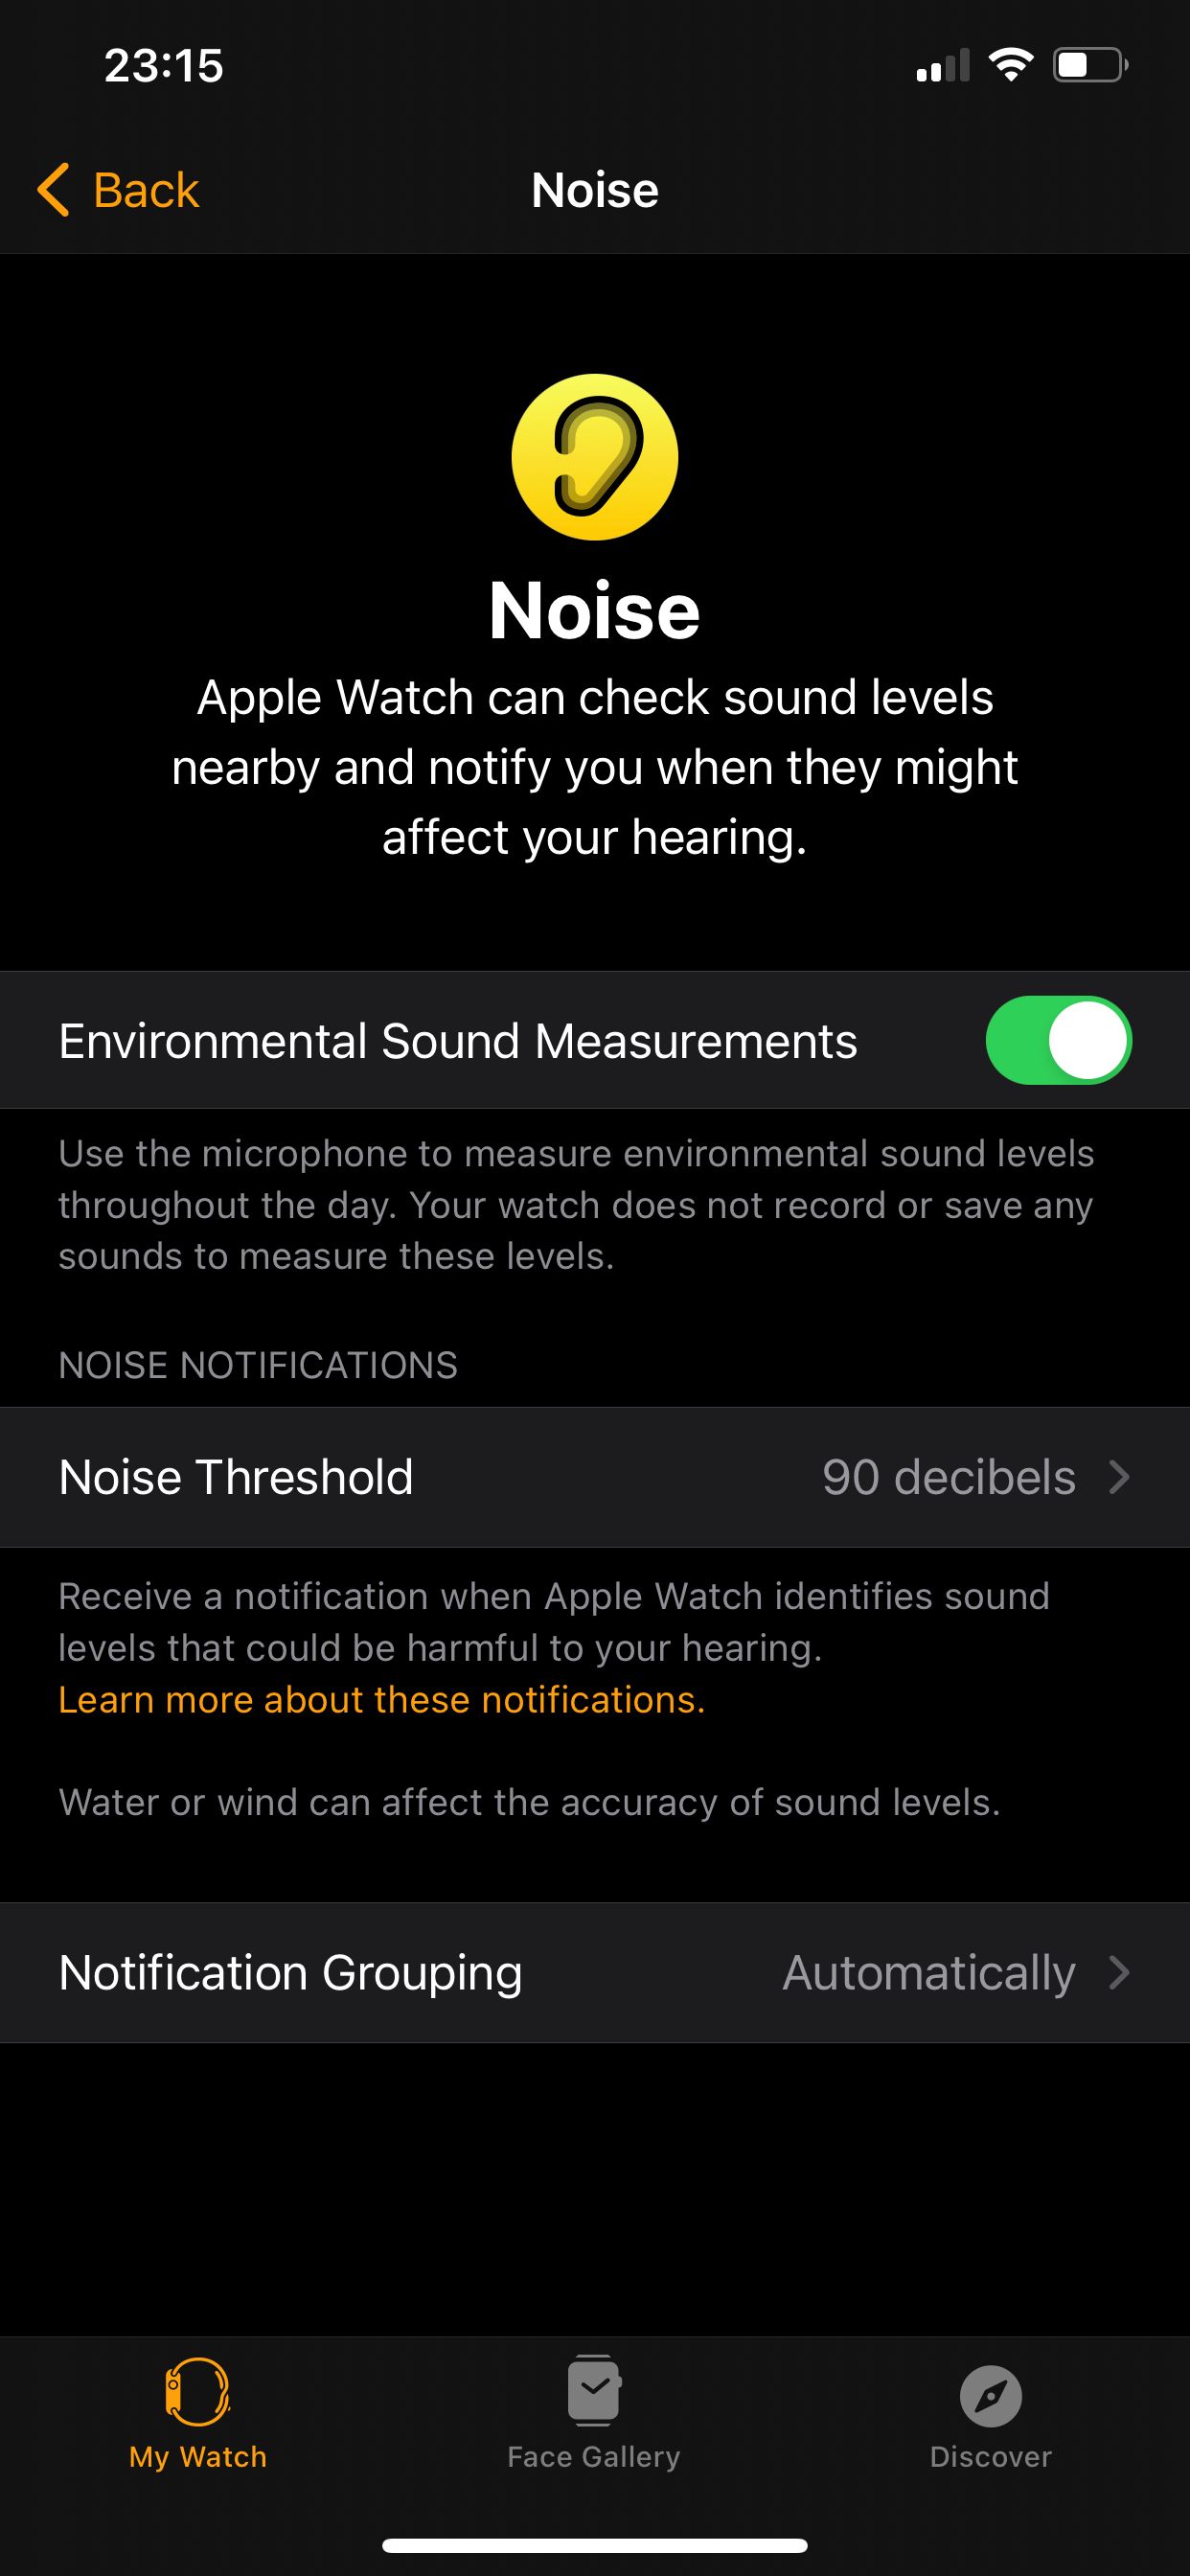 Noise threshold settings in the Watch app.